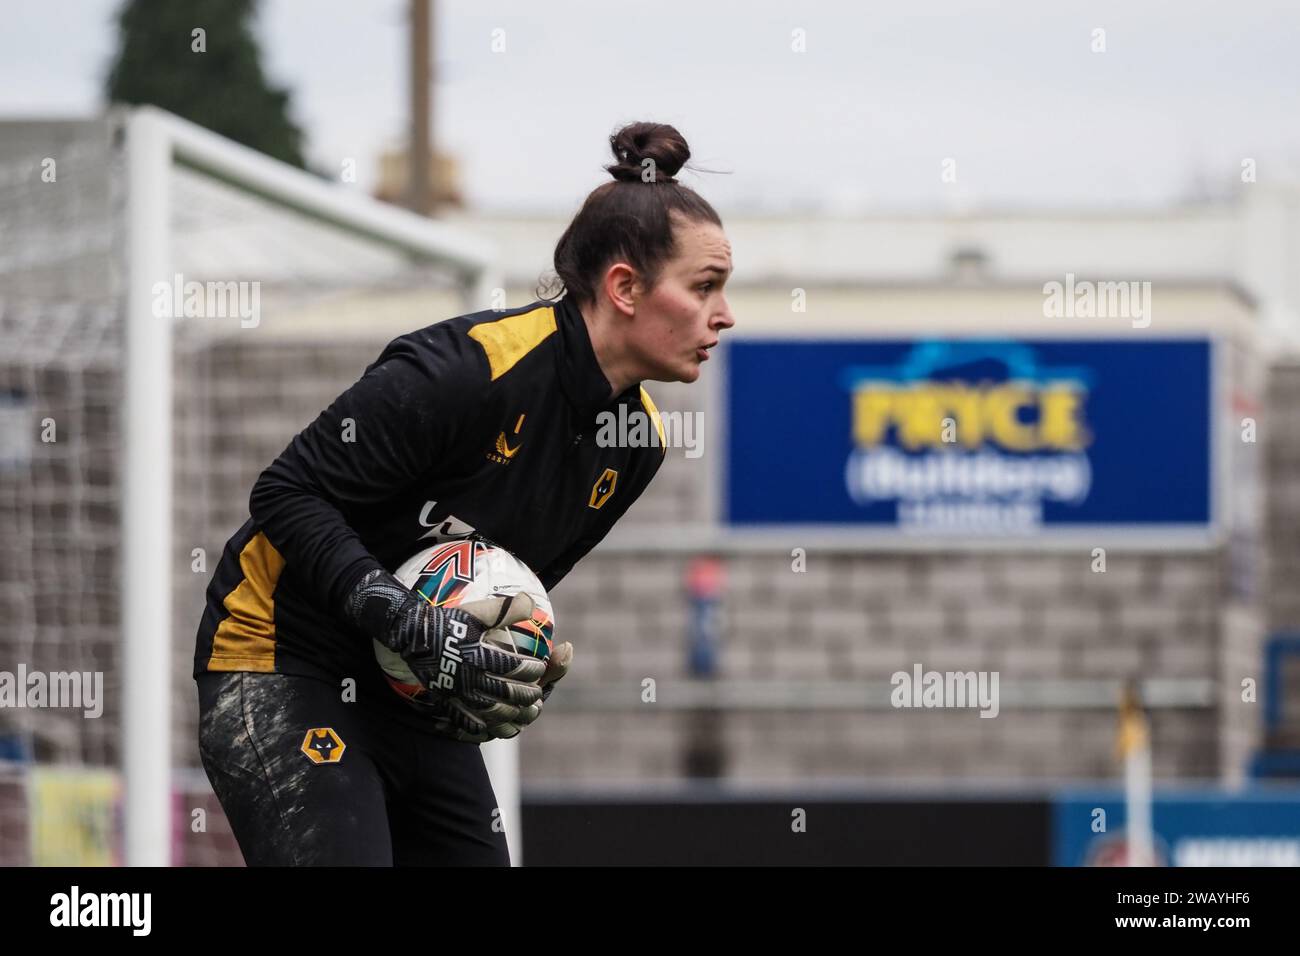 Telford, UK. 07th Jan, 2024. Telford, England, January 7th 2024: Goalkeeper Shan Turner (1 Wolverhampton Wanderers) warms up during the FA Womens National League game between Wolverhampton Wanderers and Burnley at New Bucks Head in Telford, England (Natalie Mincher/SPP) Credit: SPP Sport Press Photo. /Alamy Live News Stock Photo